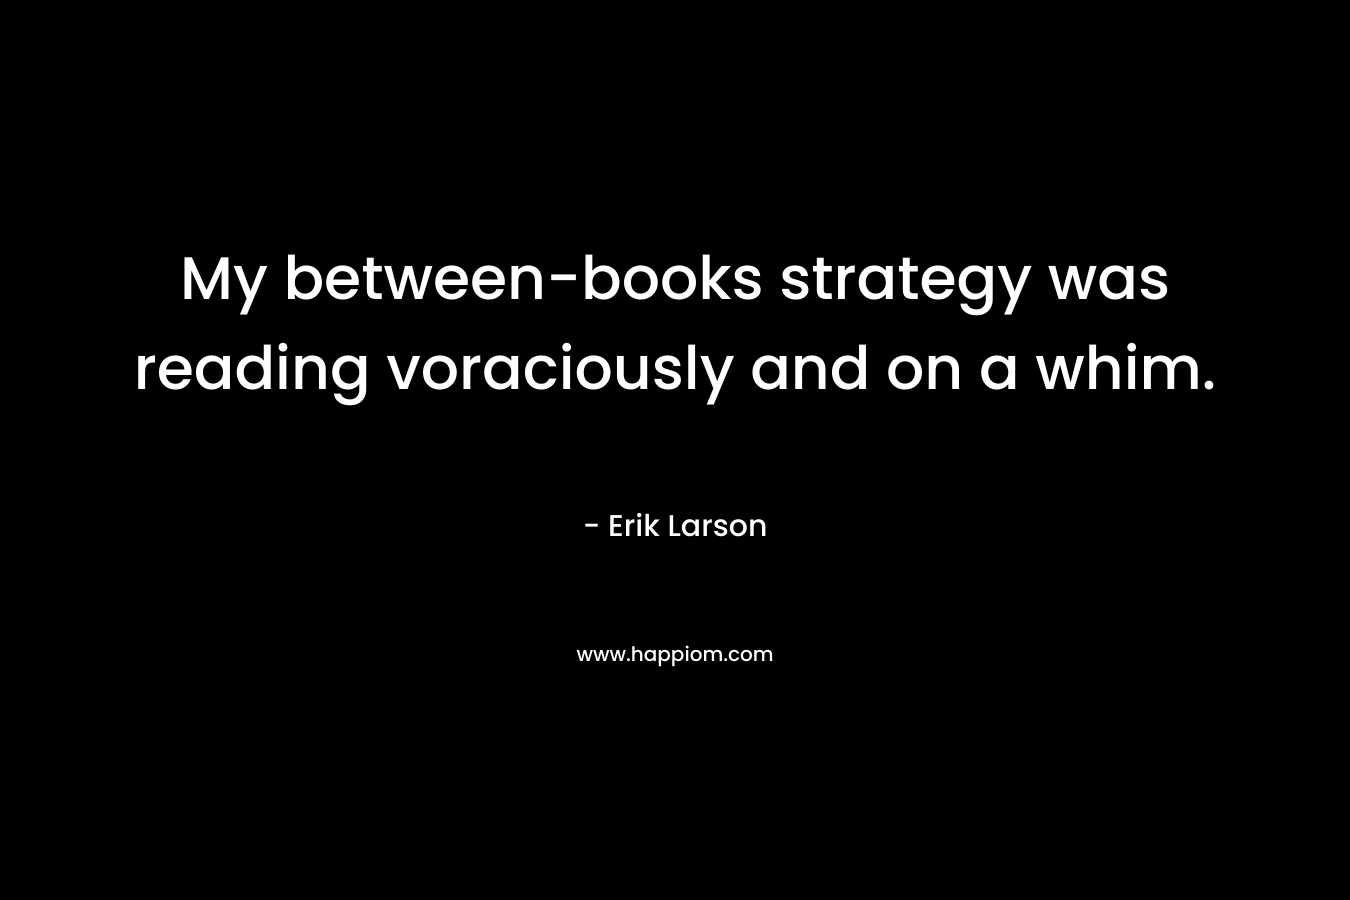 My between-books strategy was reading voraciously and on a whim.